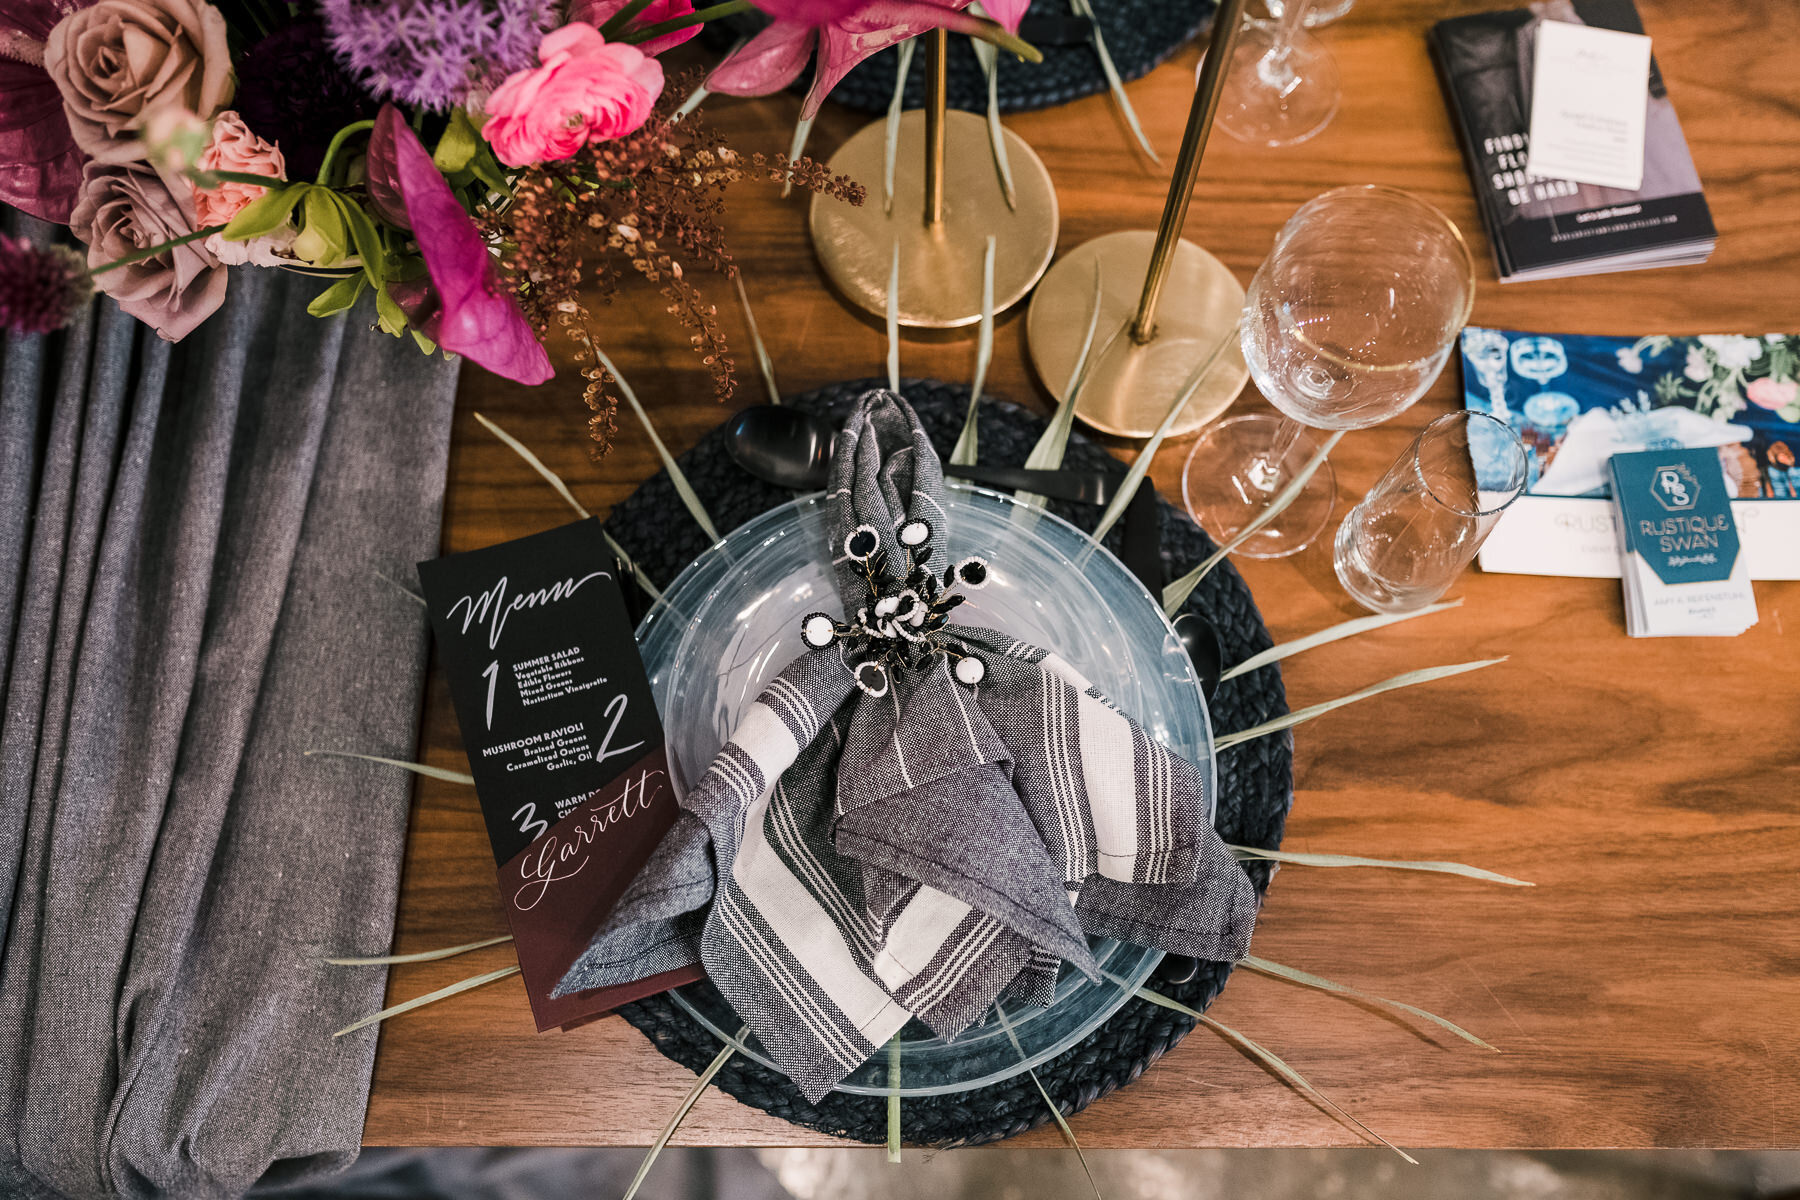 Modern Love Event by Iron + Honey featured on CHI thee WED